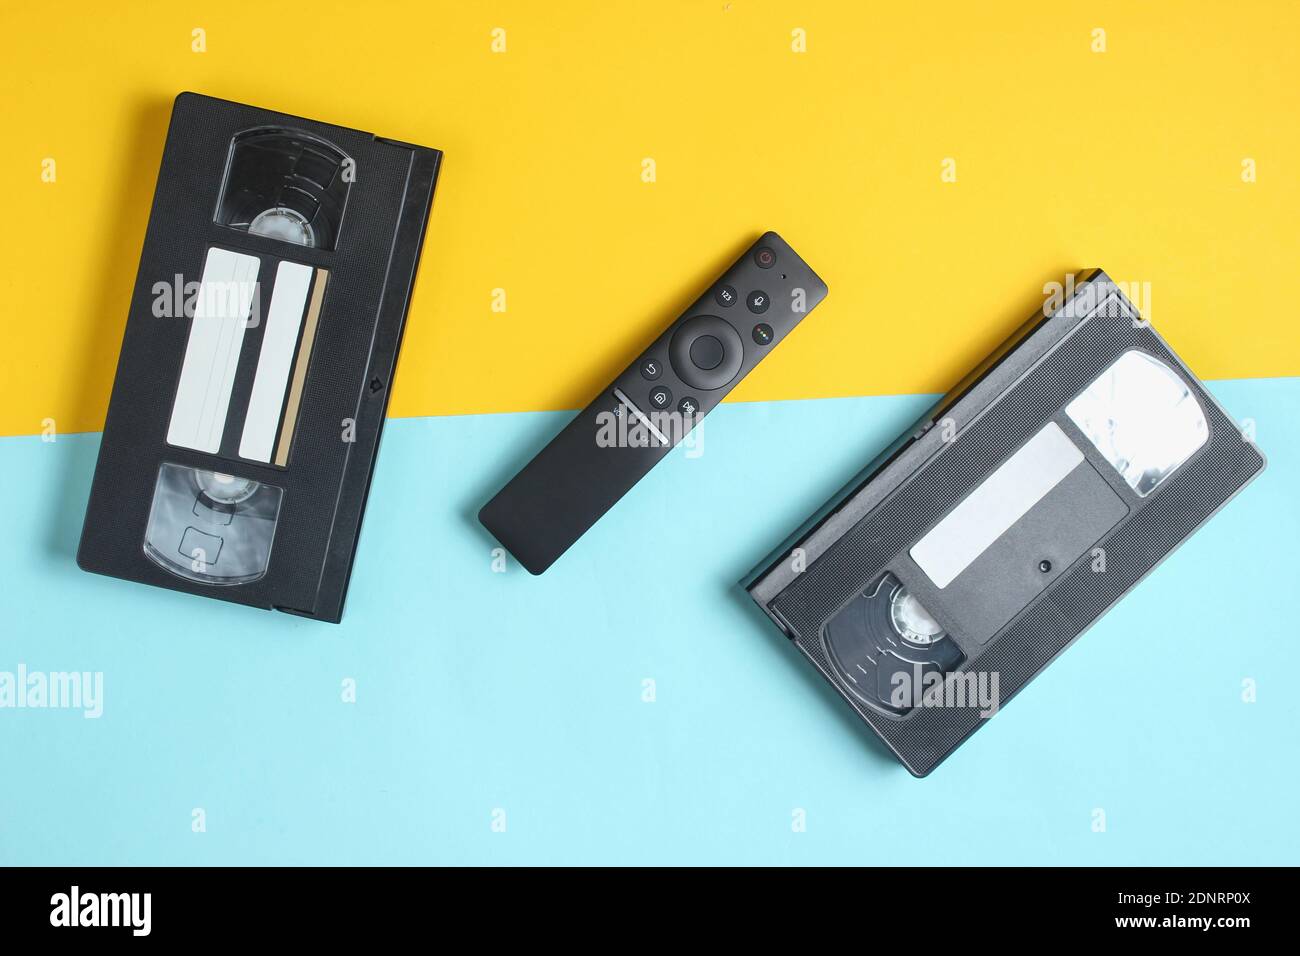 Tv remote and video cassettes on a colored pastel background Top view, minimalism Stock Photo